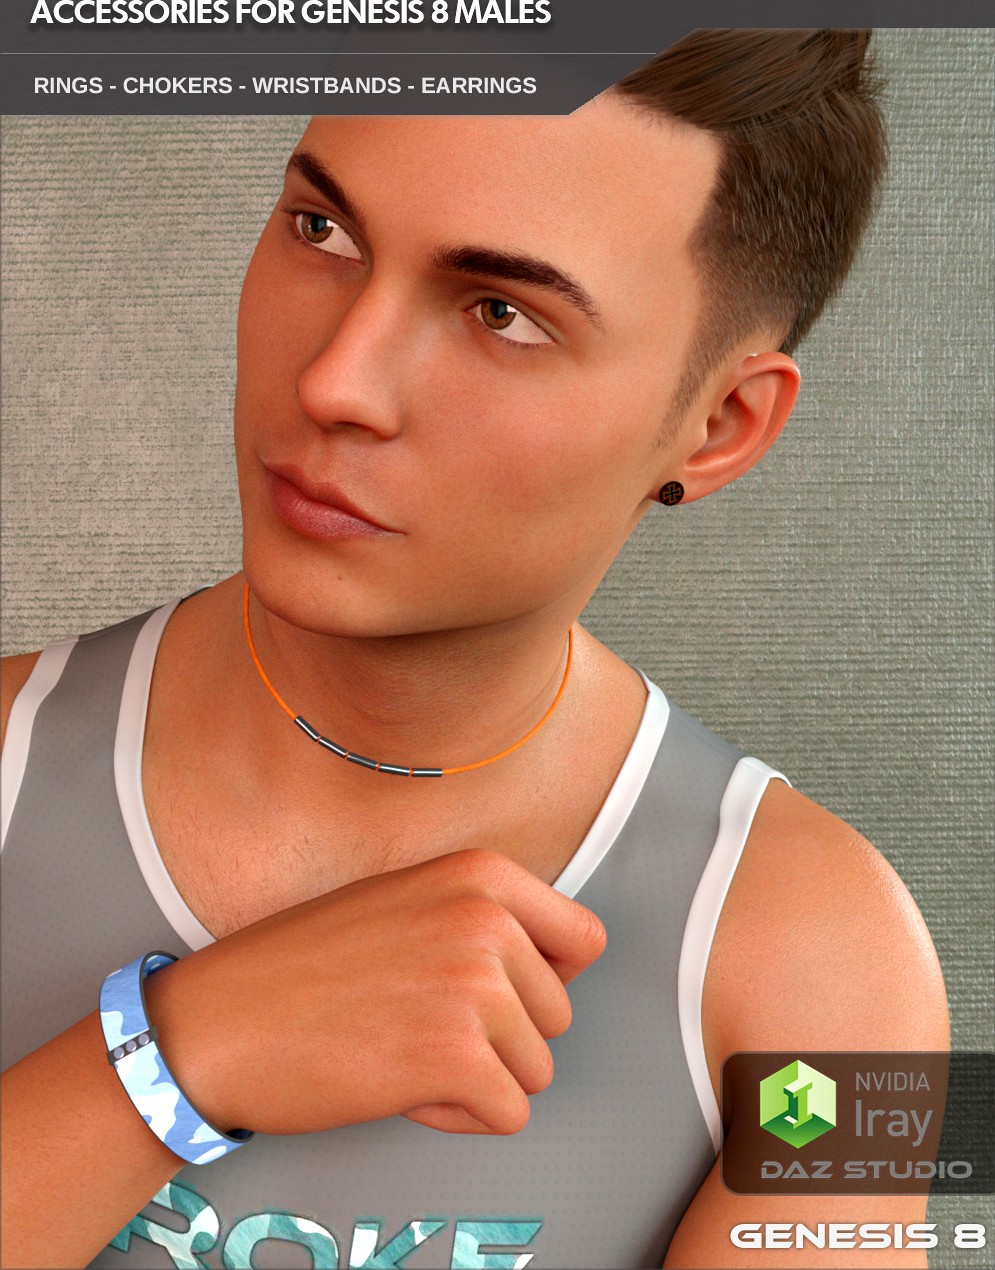 Accessories Set I for Genesis 8 Males